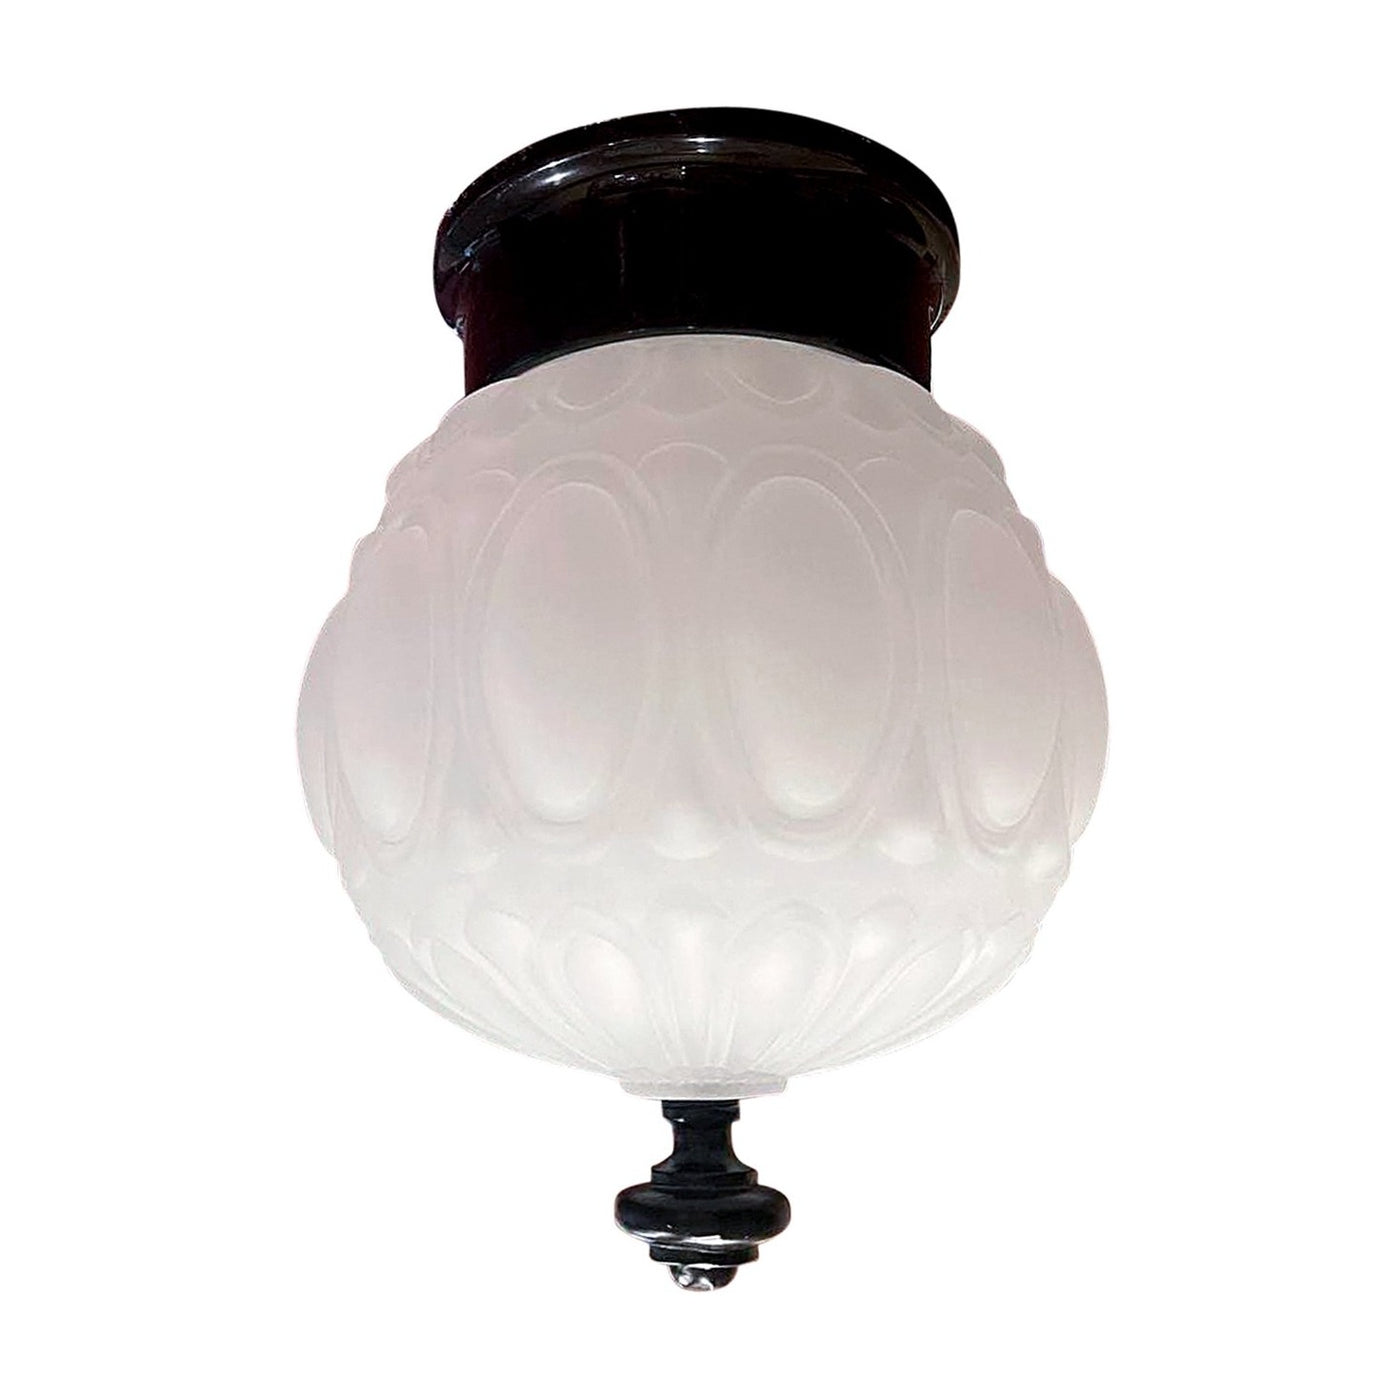 Colonial Style Glass Shade Overhead Ceiling Light Fixture (Flat Black Finish)